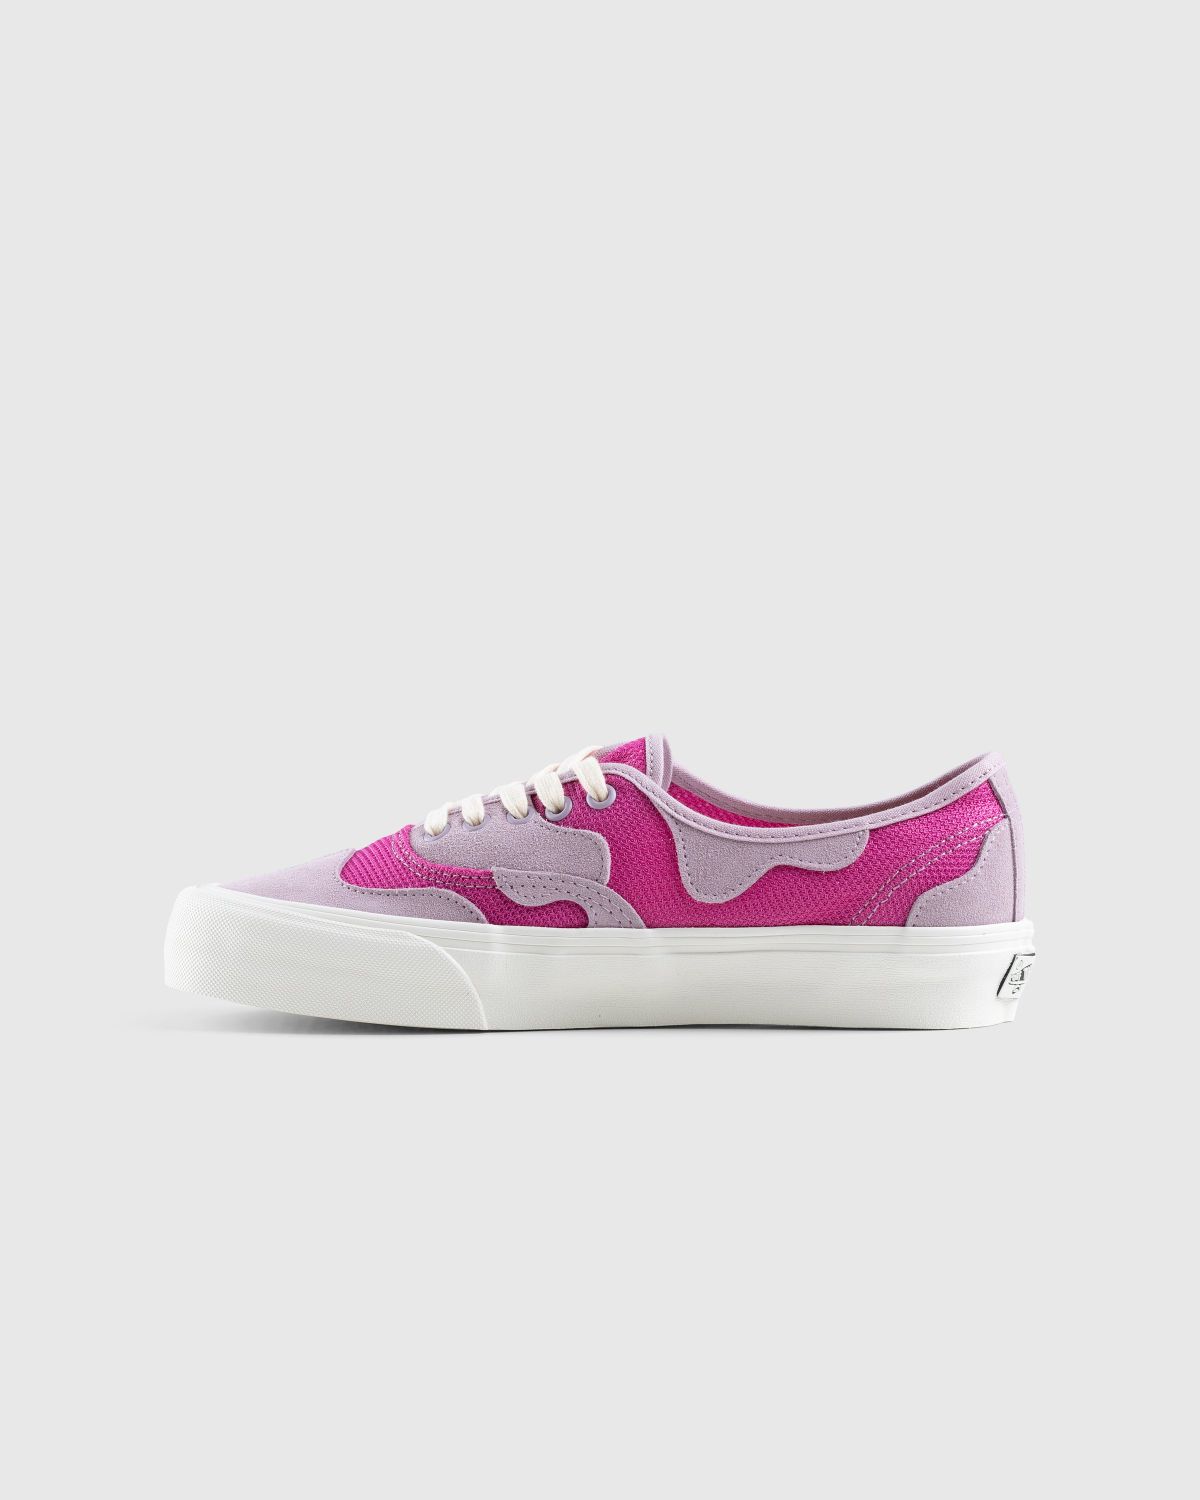 Vans – UA Authentic VR3 PW LX Pink - Sneakers - Pink - Image 2